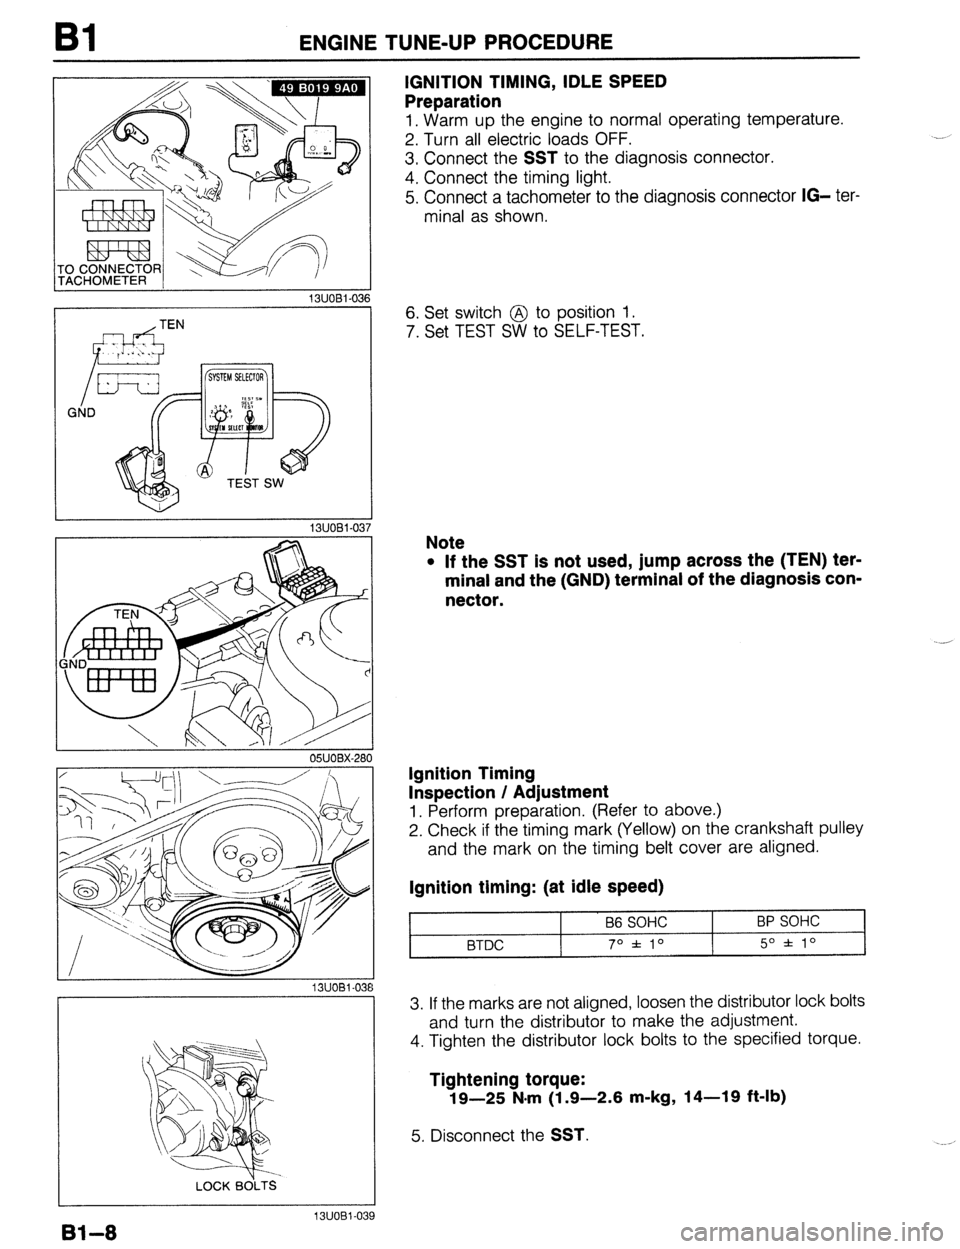 MAZDA PROTEGE 1992  Workshop Manual Bl ENGINE TUNE-UP PROCEDURE 
13UOBi-036 
-i 
OWOBX-261 
13UOBl-08 
LOCK BOLTS 
IGNITION TIMING, IDLE SPEED 
Preparation 
1, Warm up the engine to normal operating temperature. 
2. Turn all electric lo